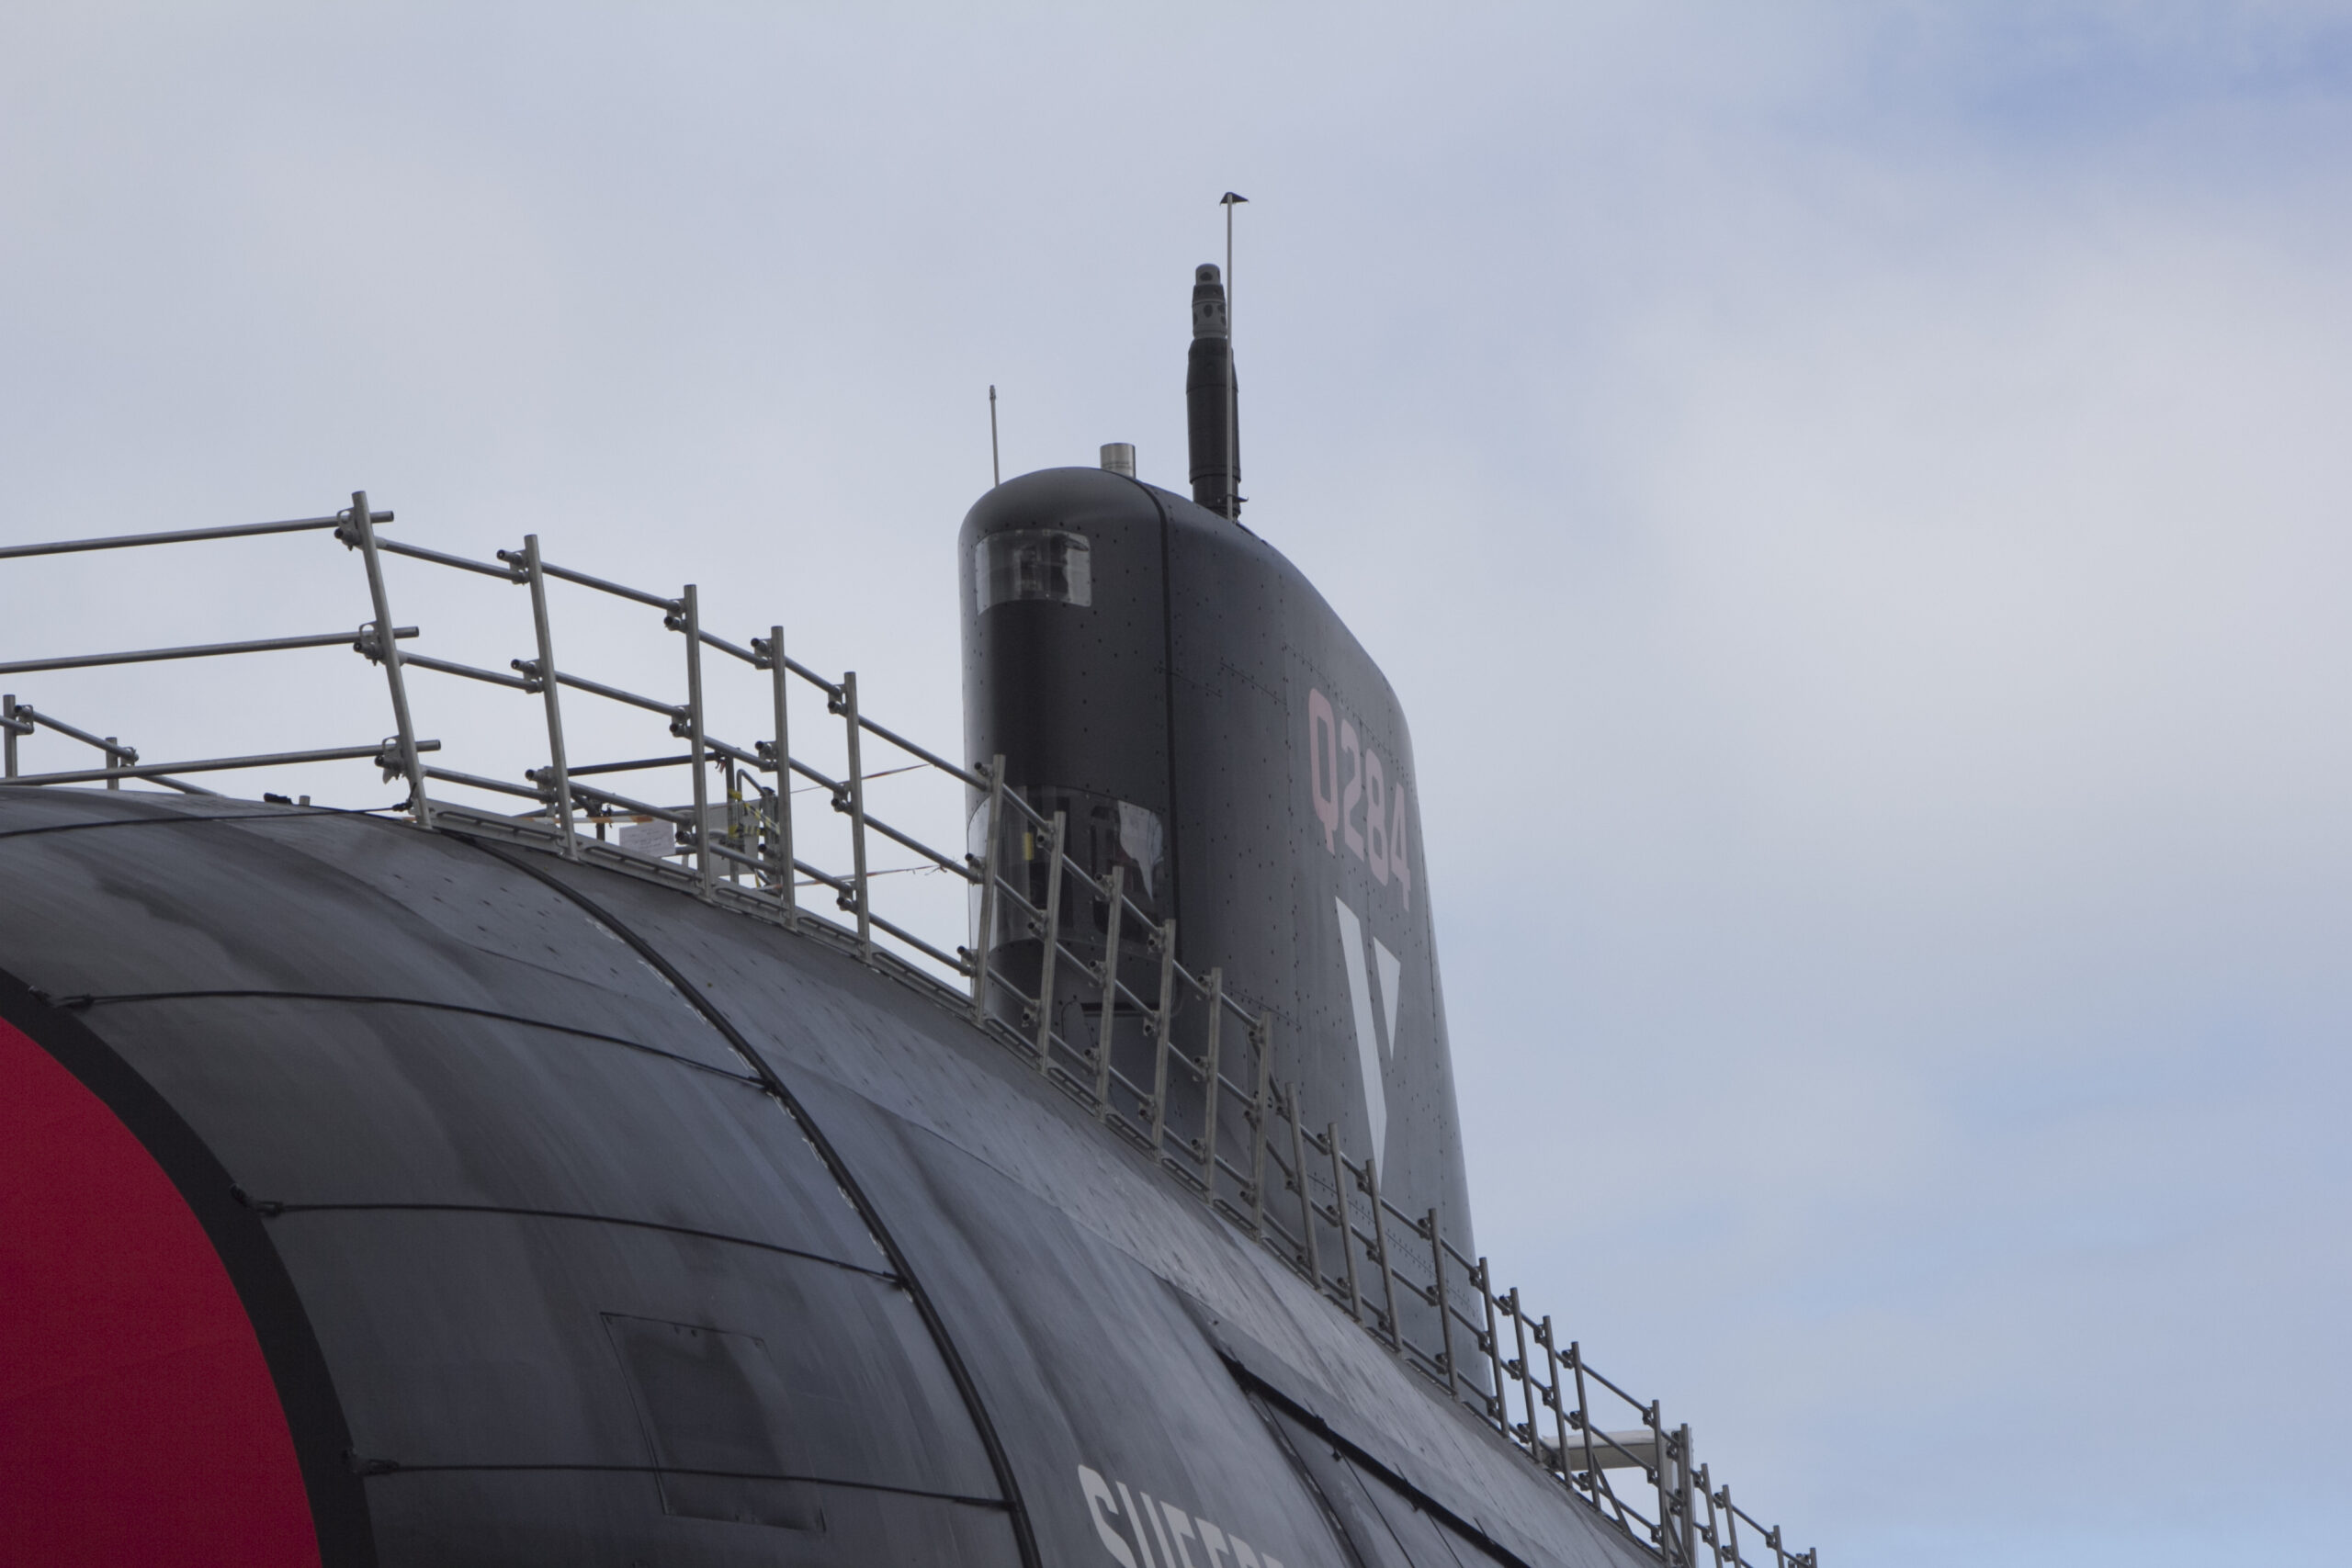 France’s new 5,181-ton nuclear submarine has no traditional periscope. Here’s how that works.